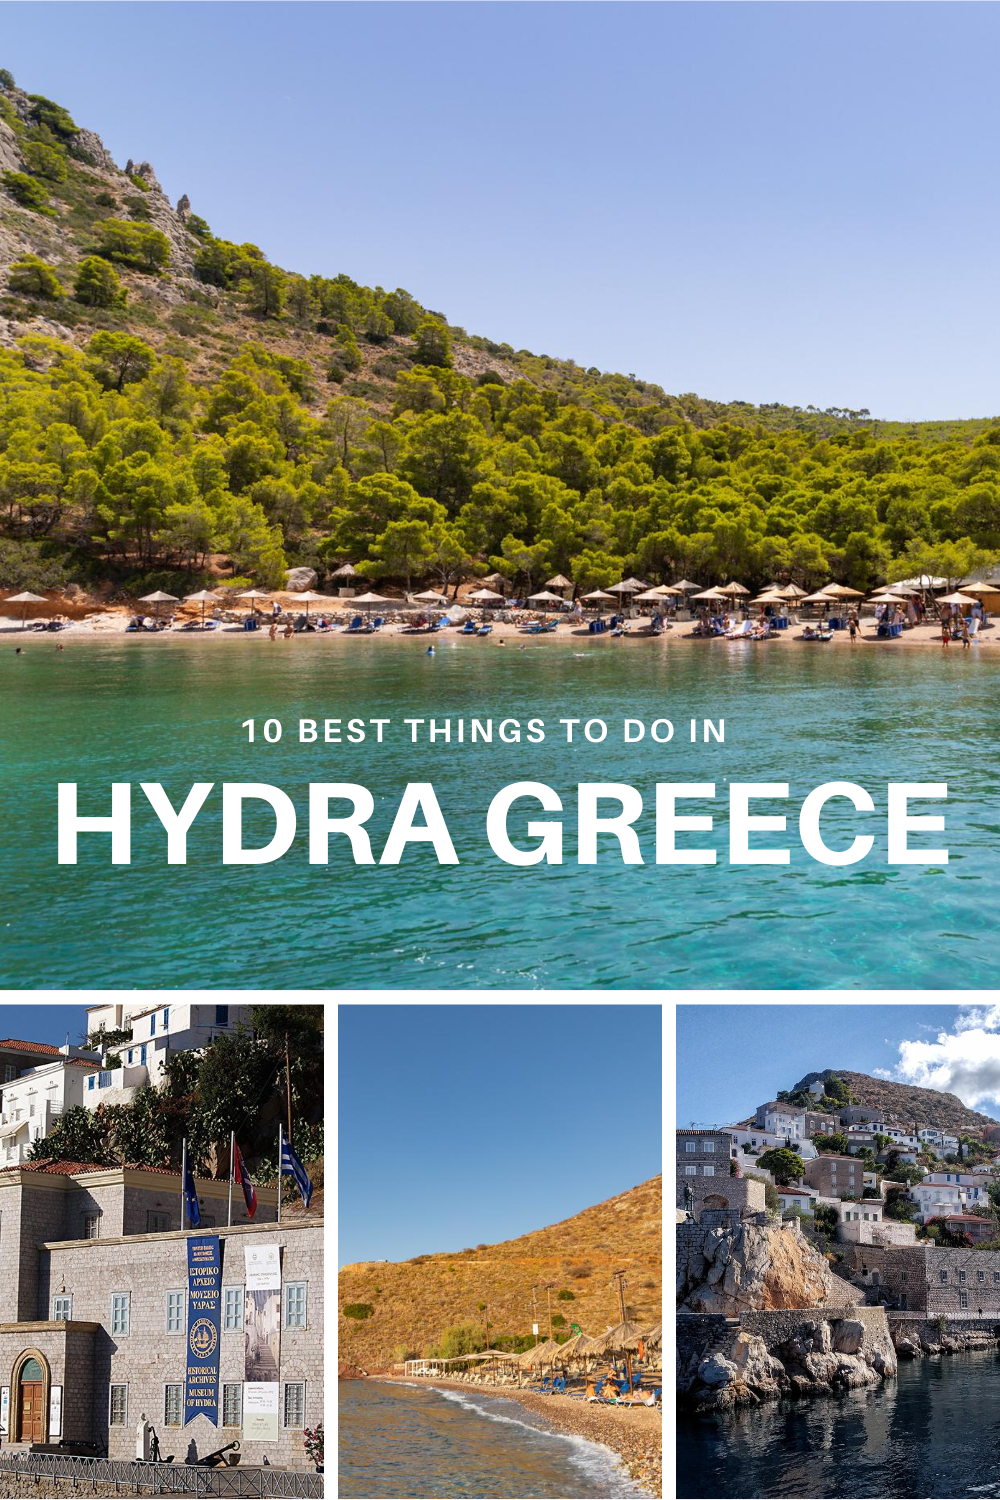 10 Best Things to do in Hydra, Greece